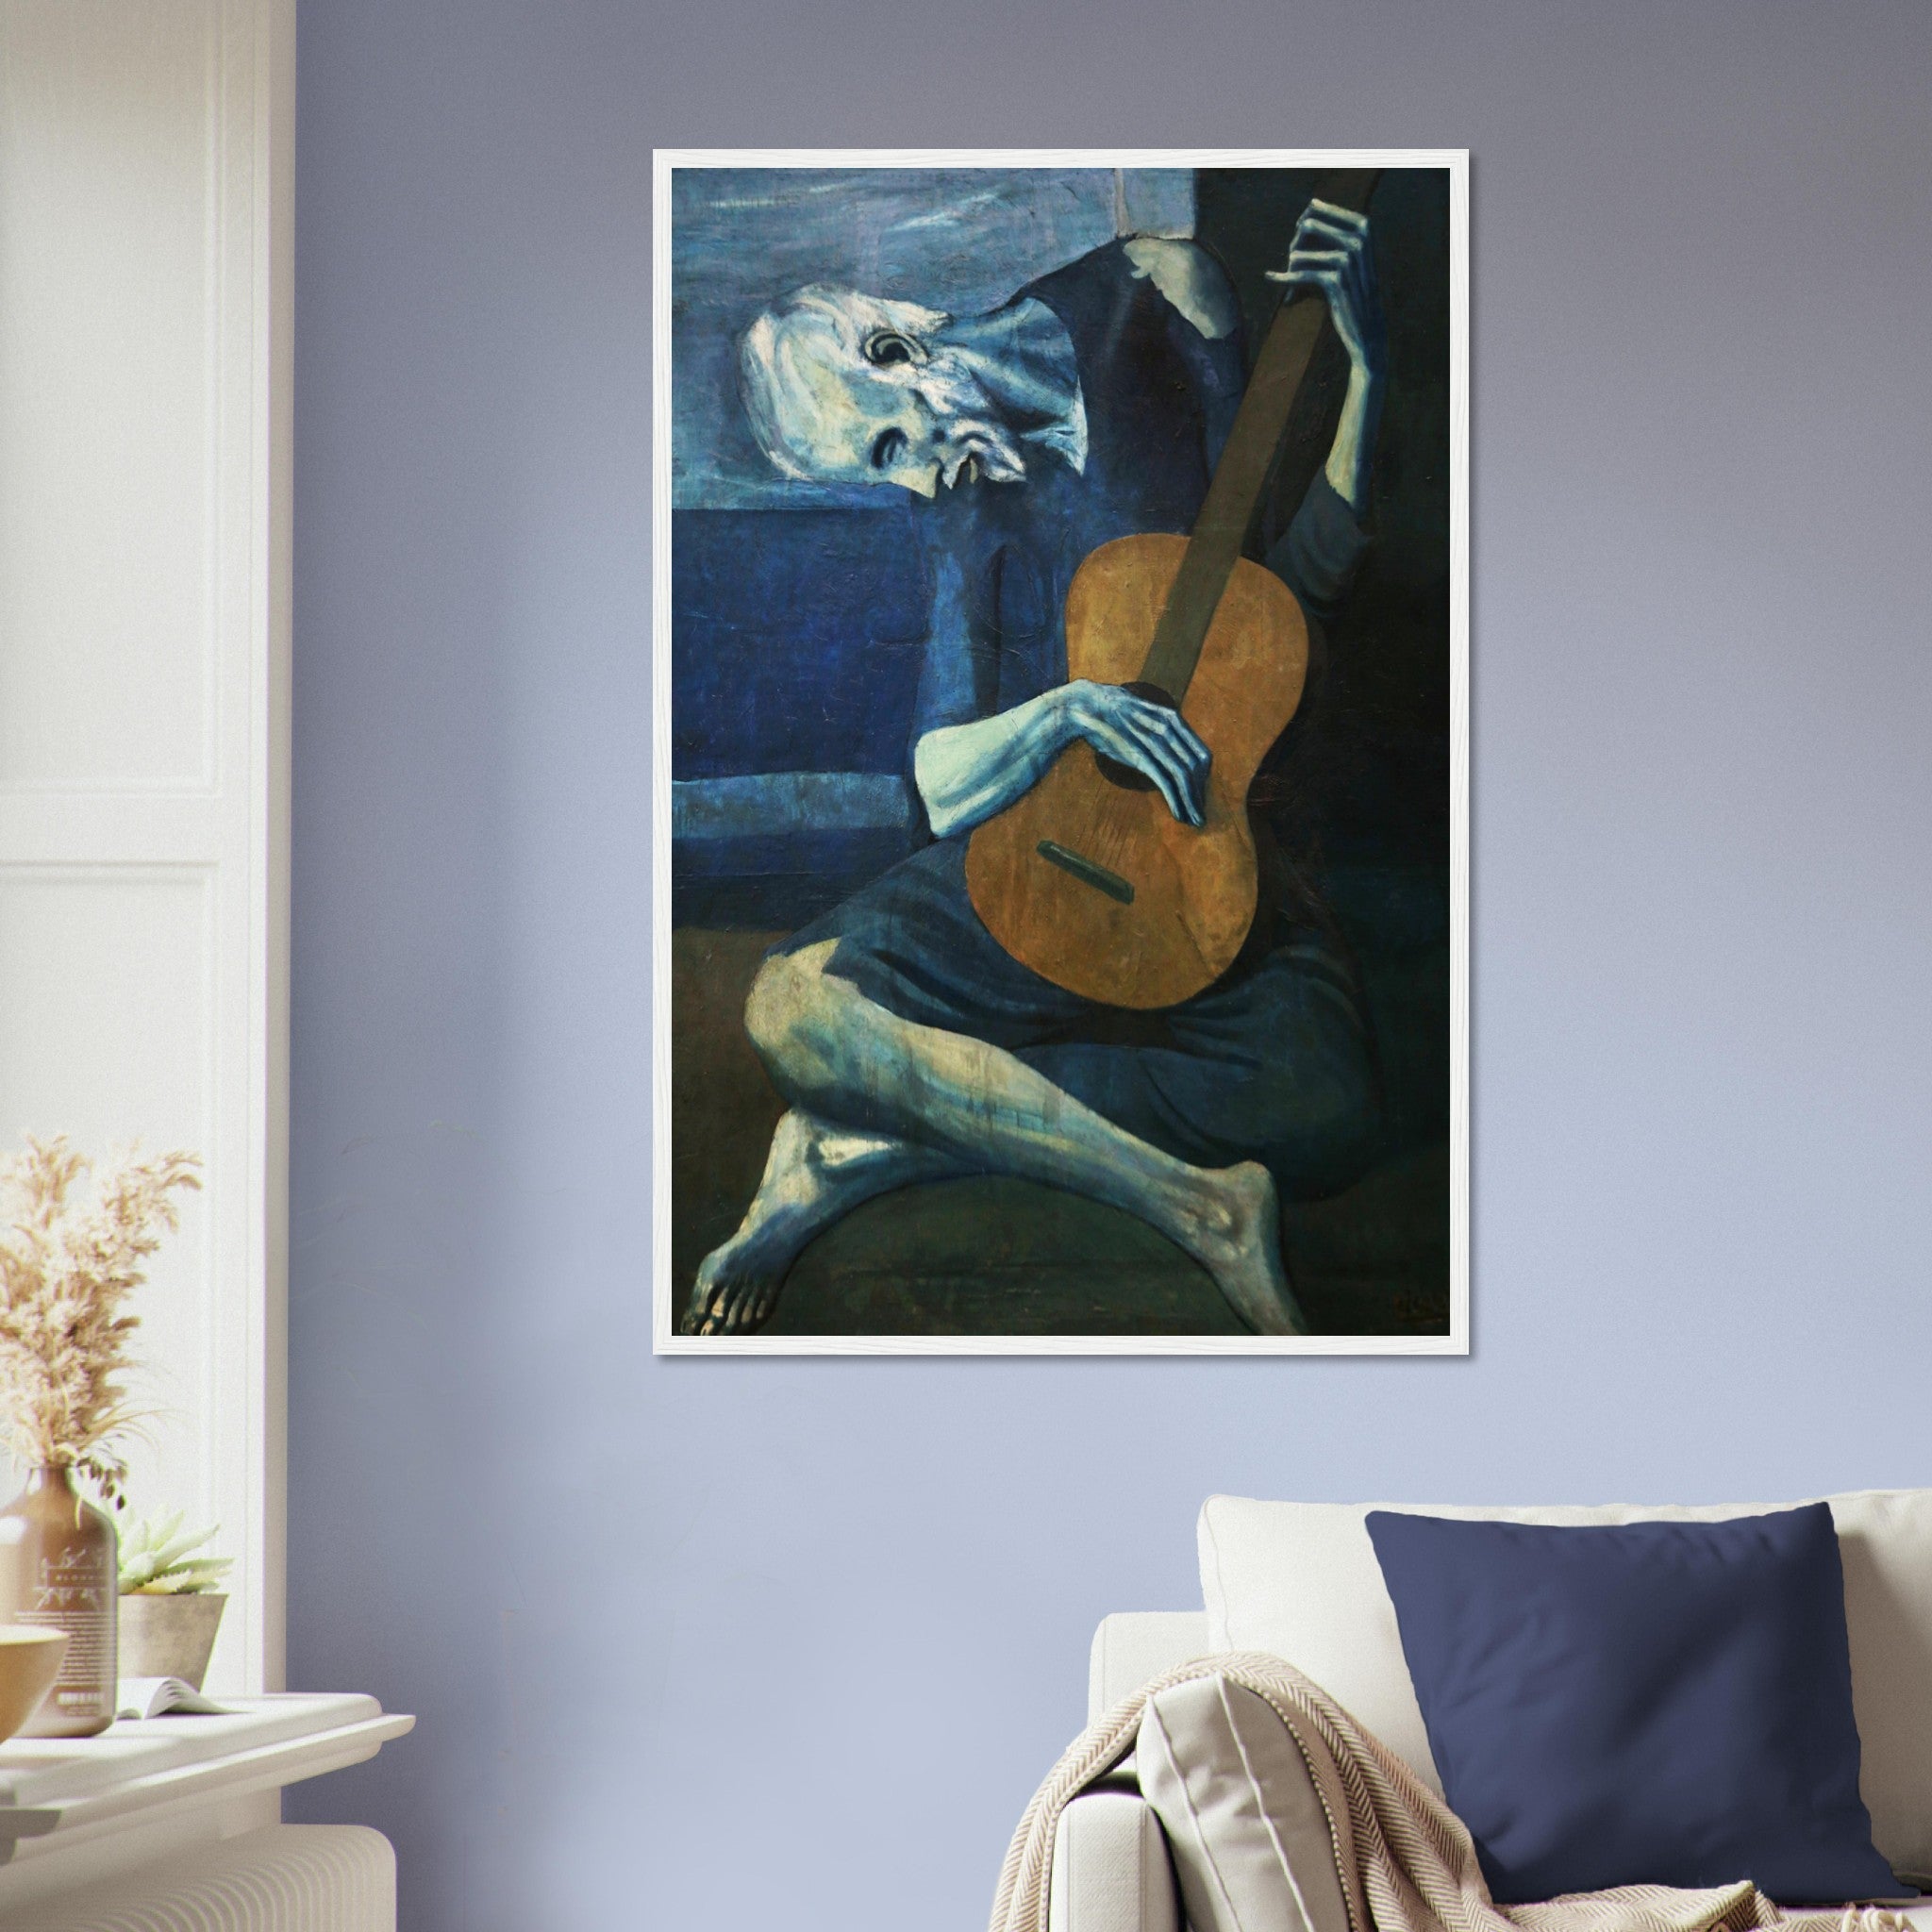 Picasso Framed Print, The Old Guitarist - Picasso Print, Pablo Picasso 1904 - WallArtPrints4U